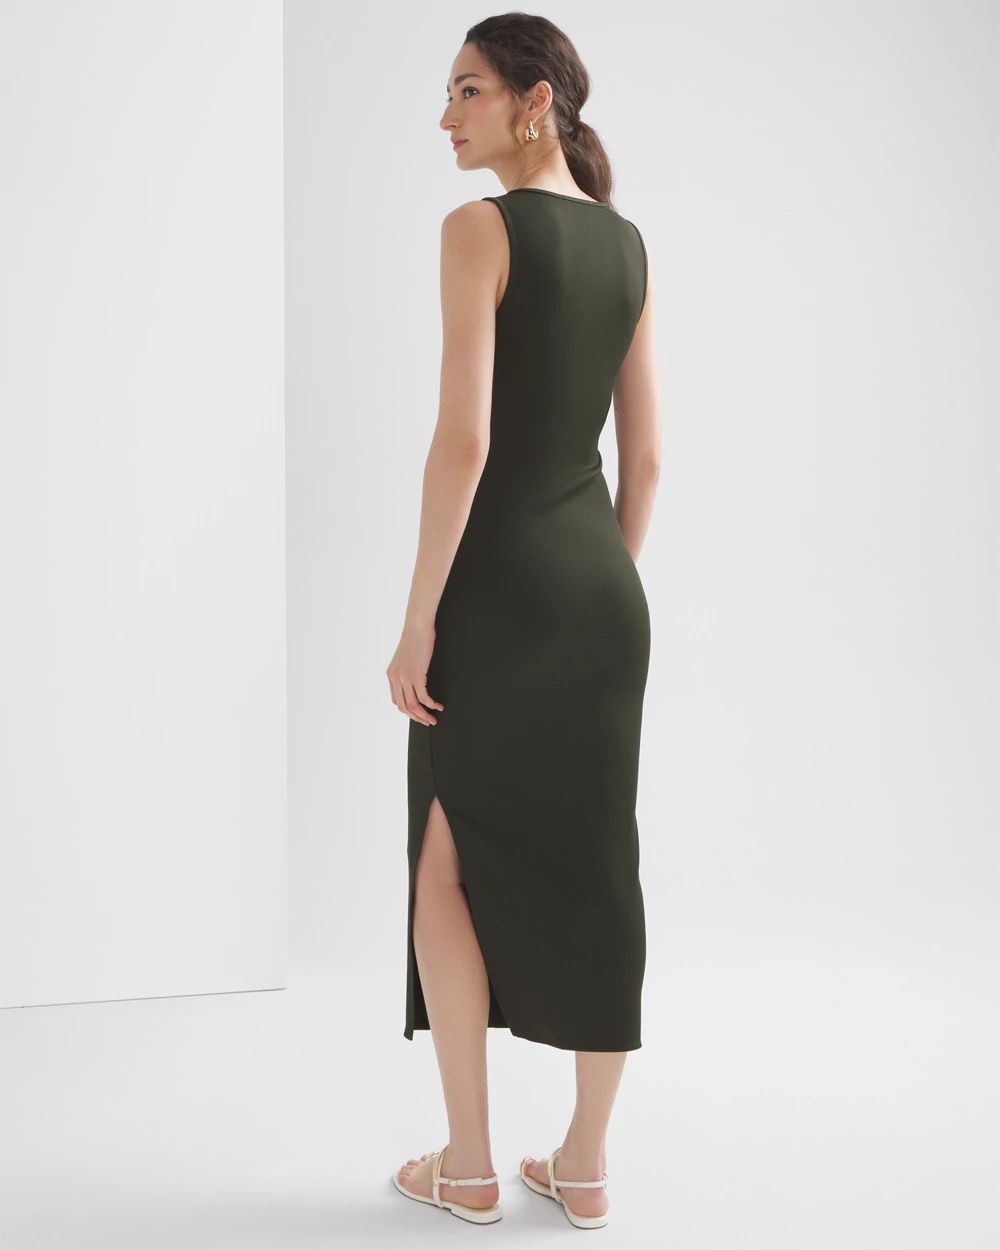 WHBM® FORME Ribbed Lace-Up Dress click to view larger image.